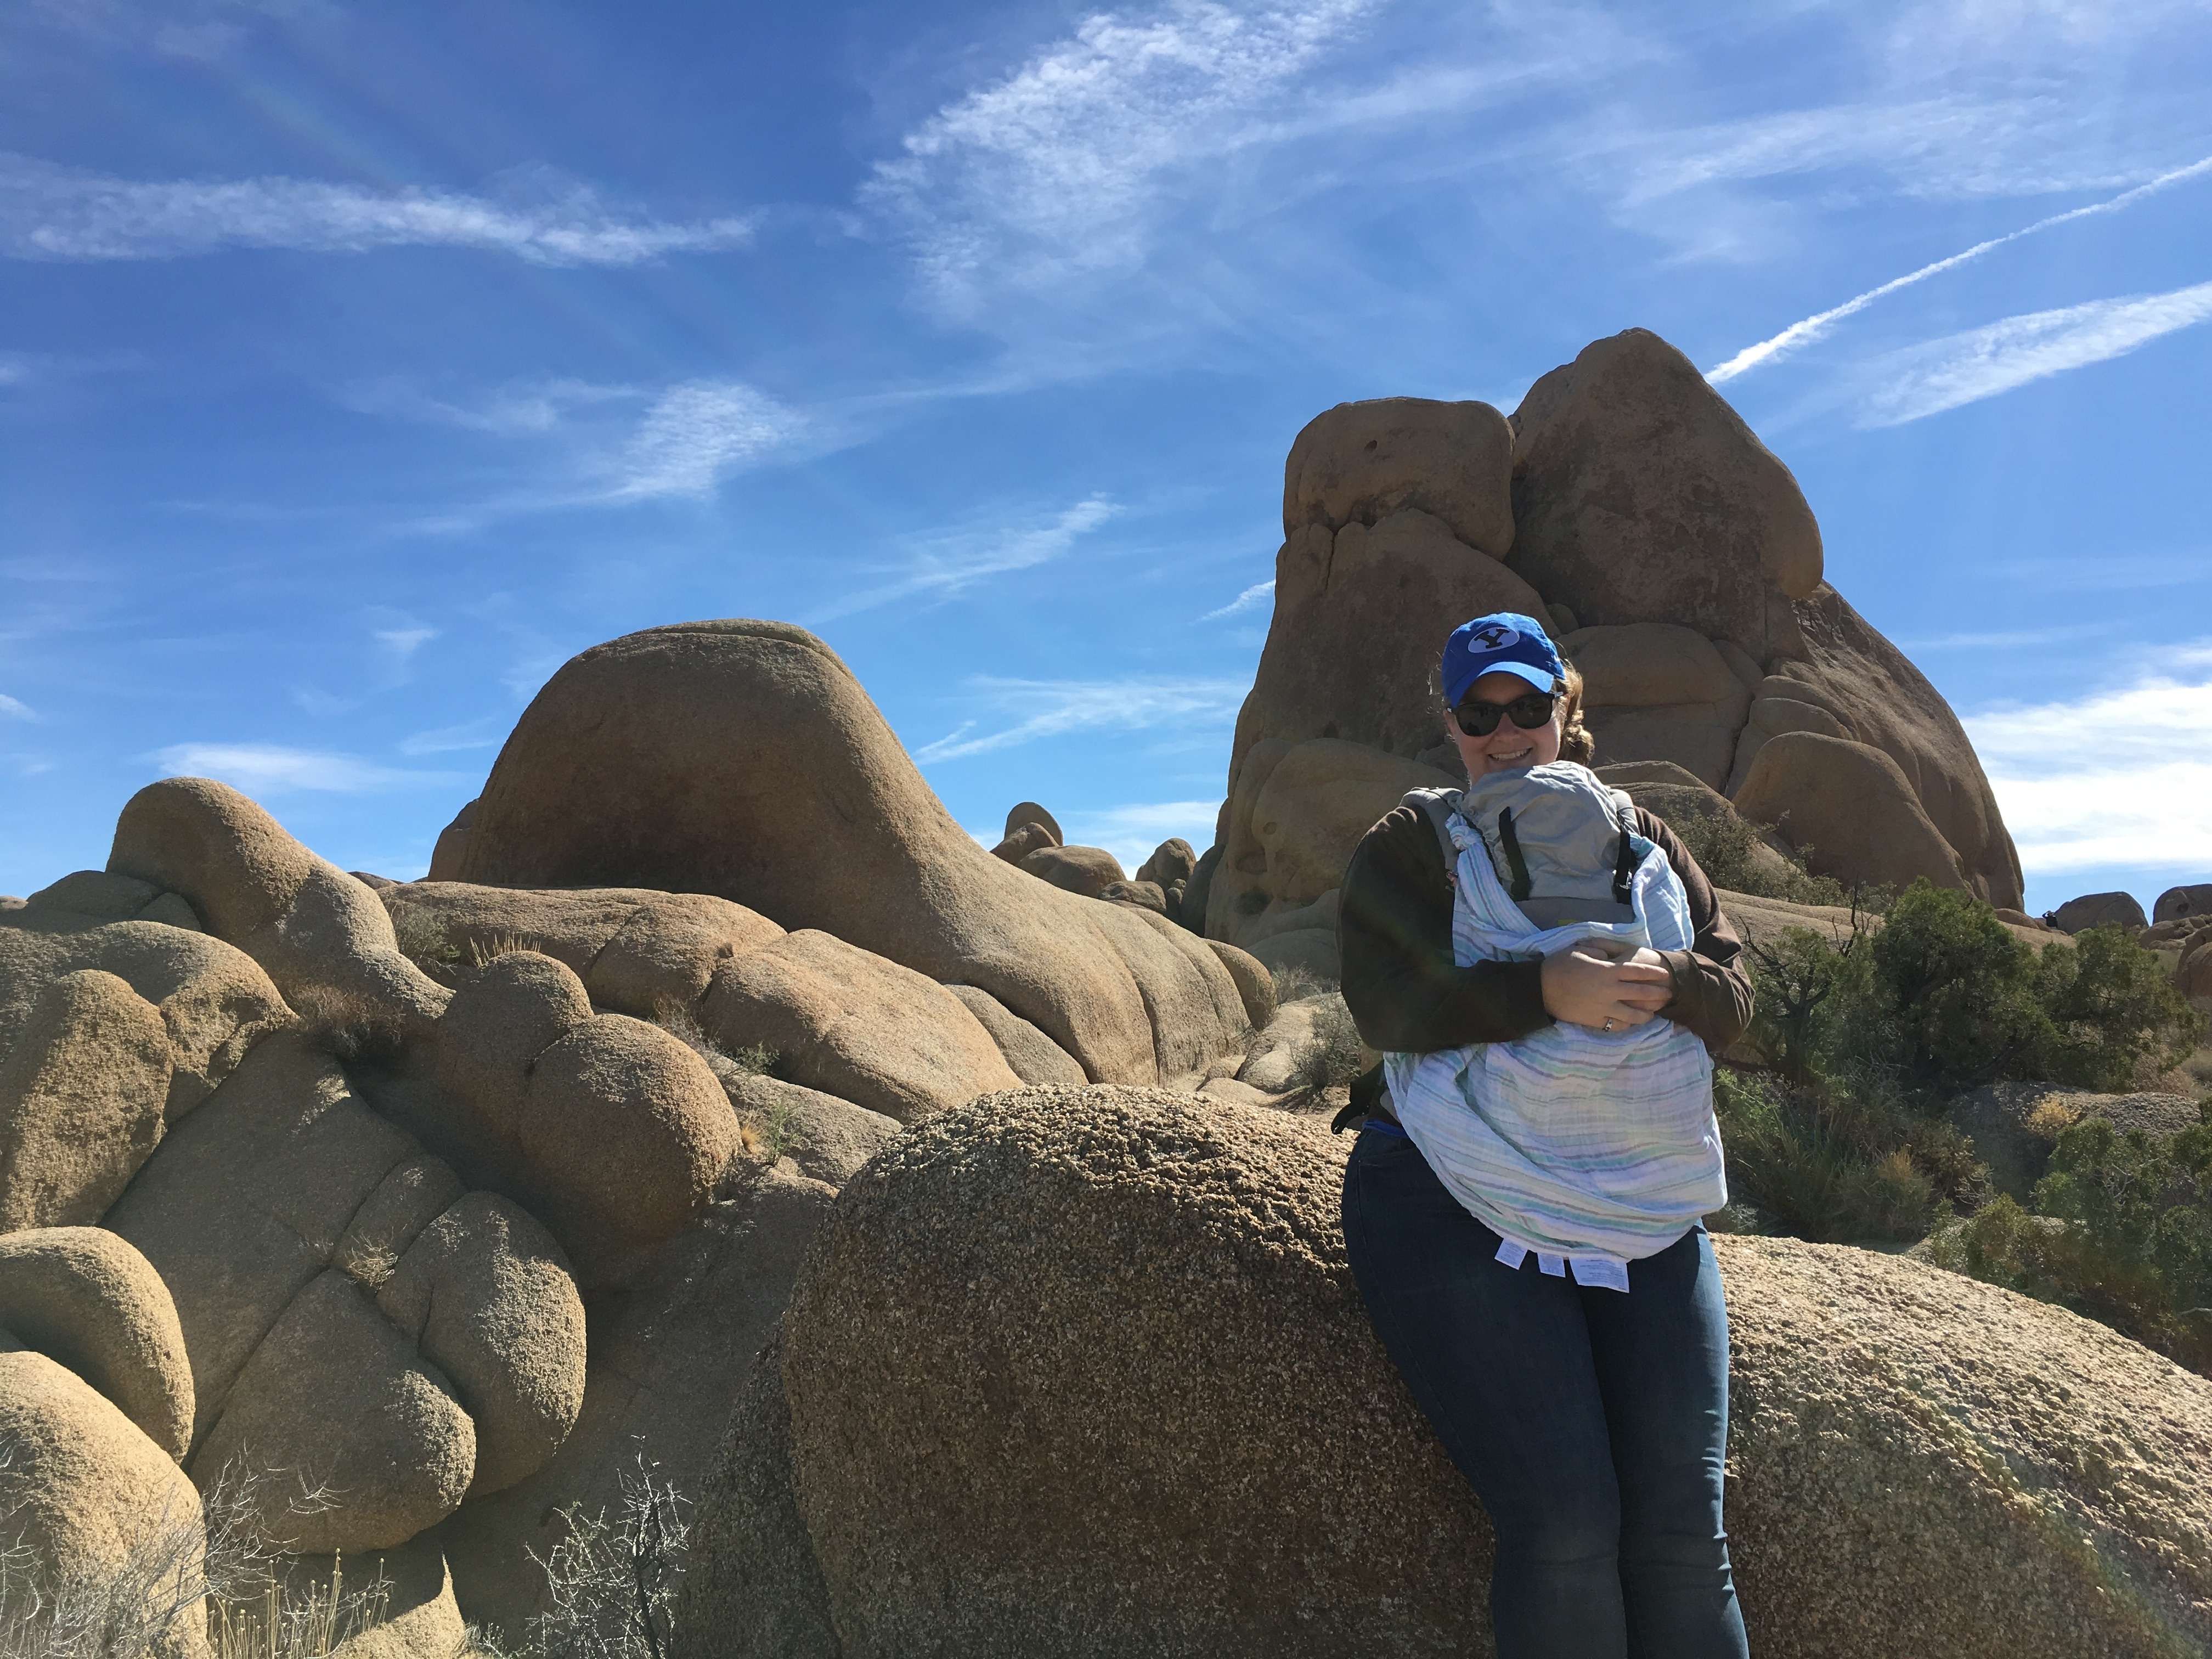 Meagan hiking with a baby at Joshua Tree